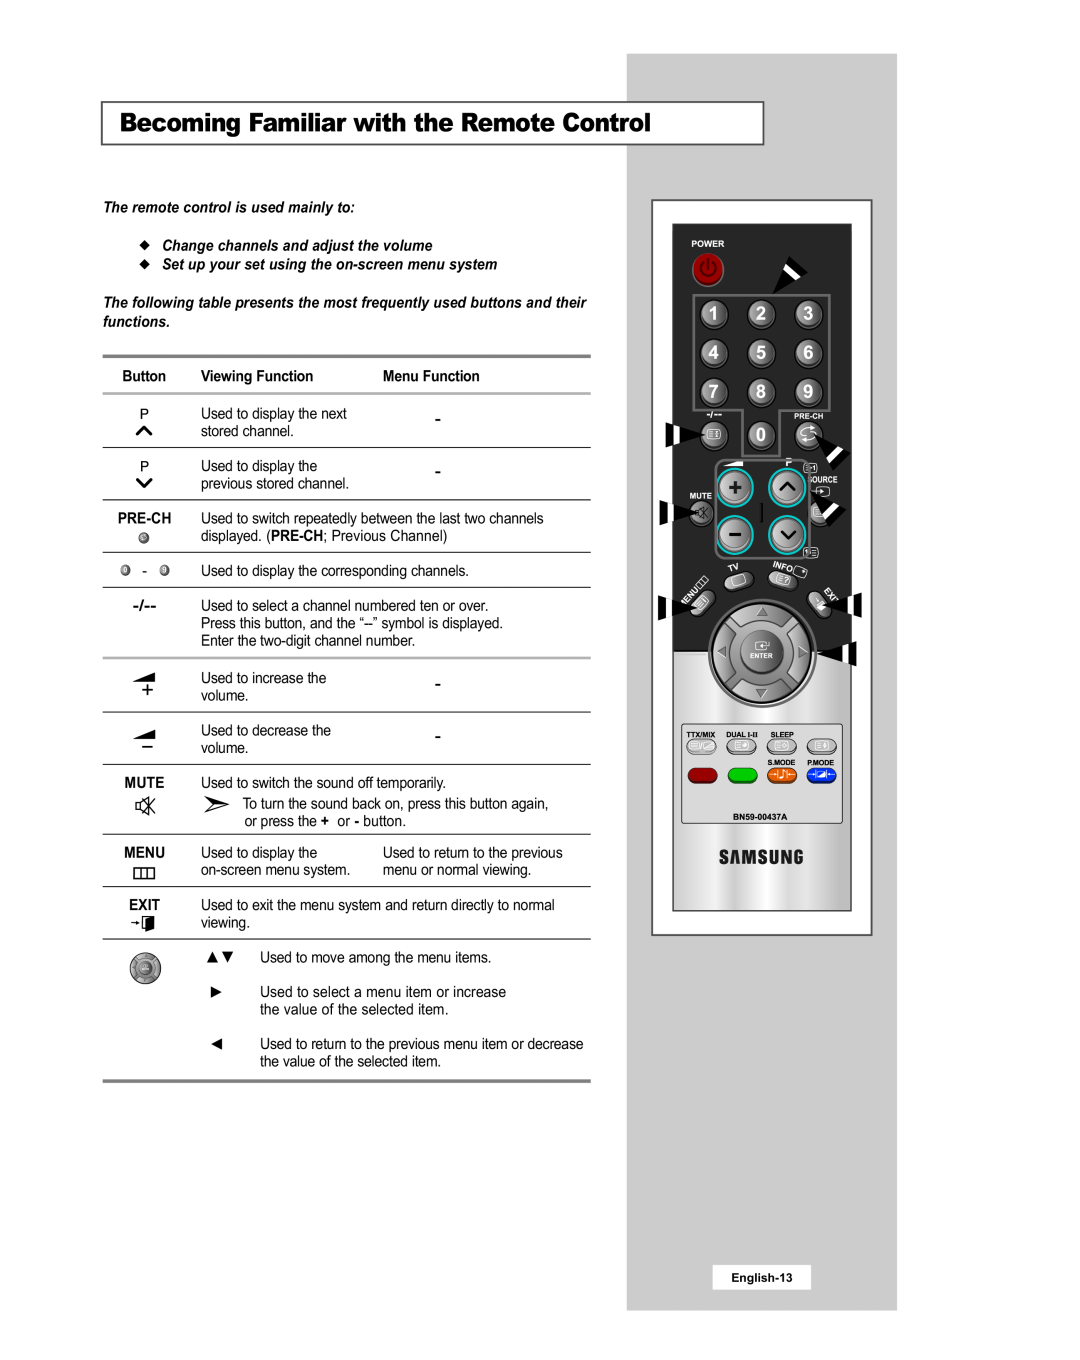 Samsung LE20S51BU manual Becoming Familiar with the Remote Control, The remote control is used mainly to, Button 